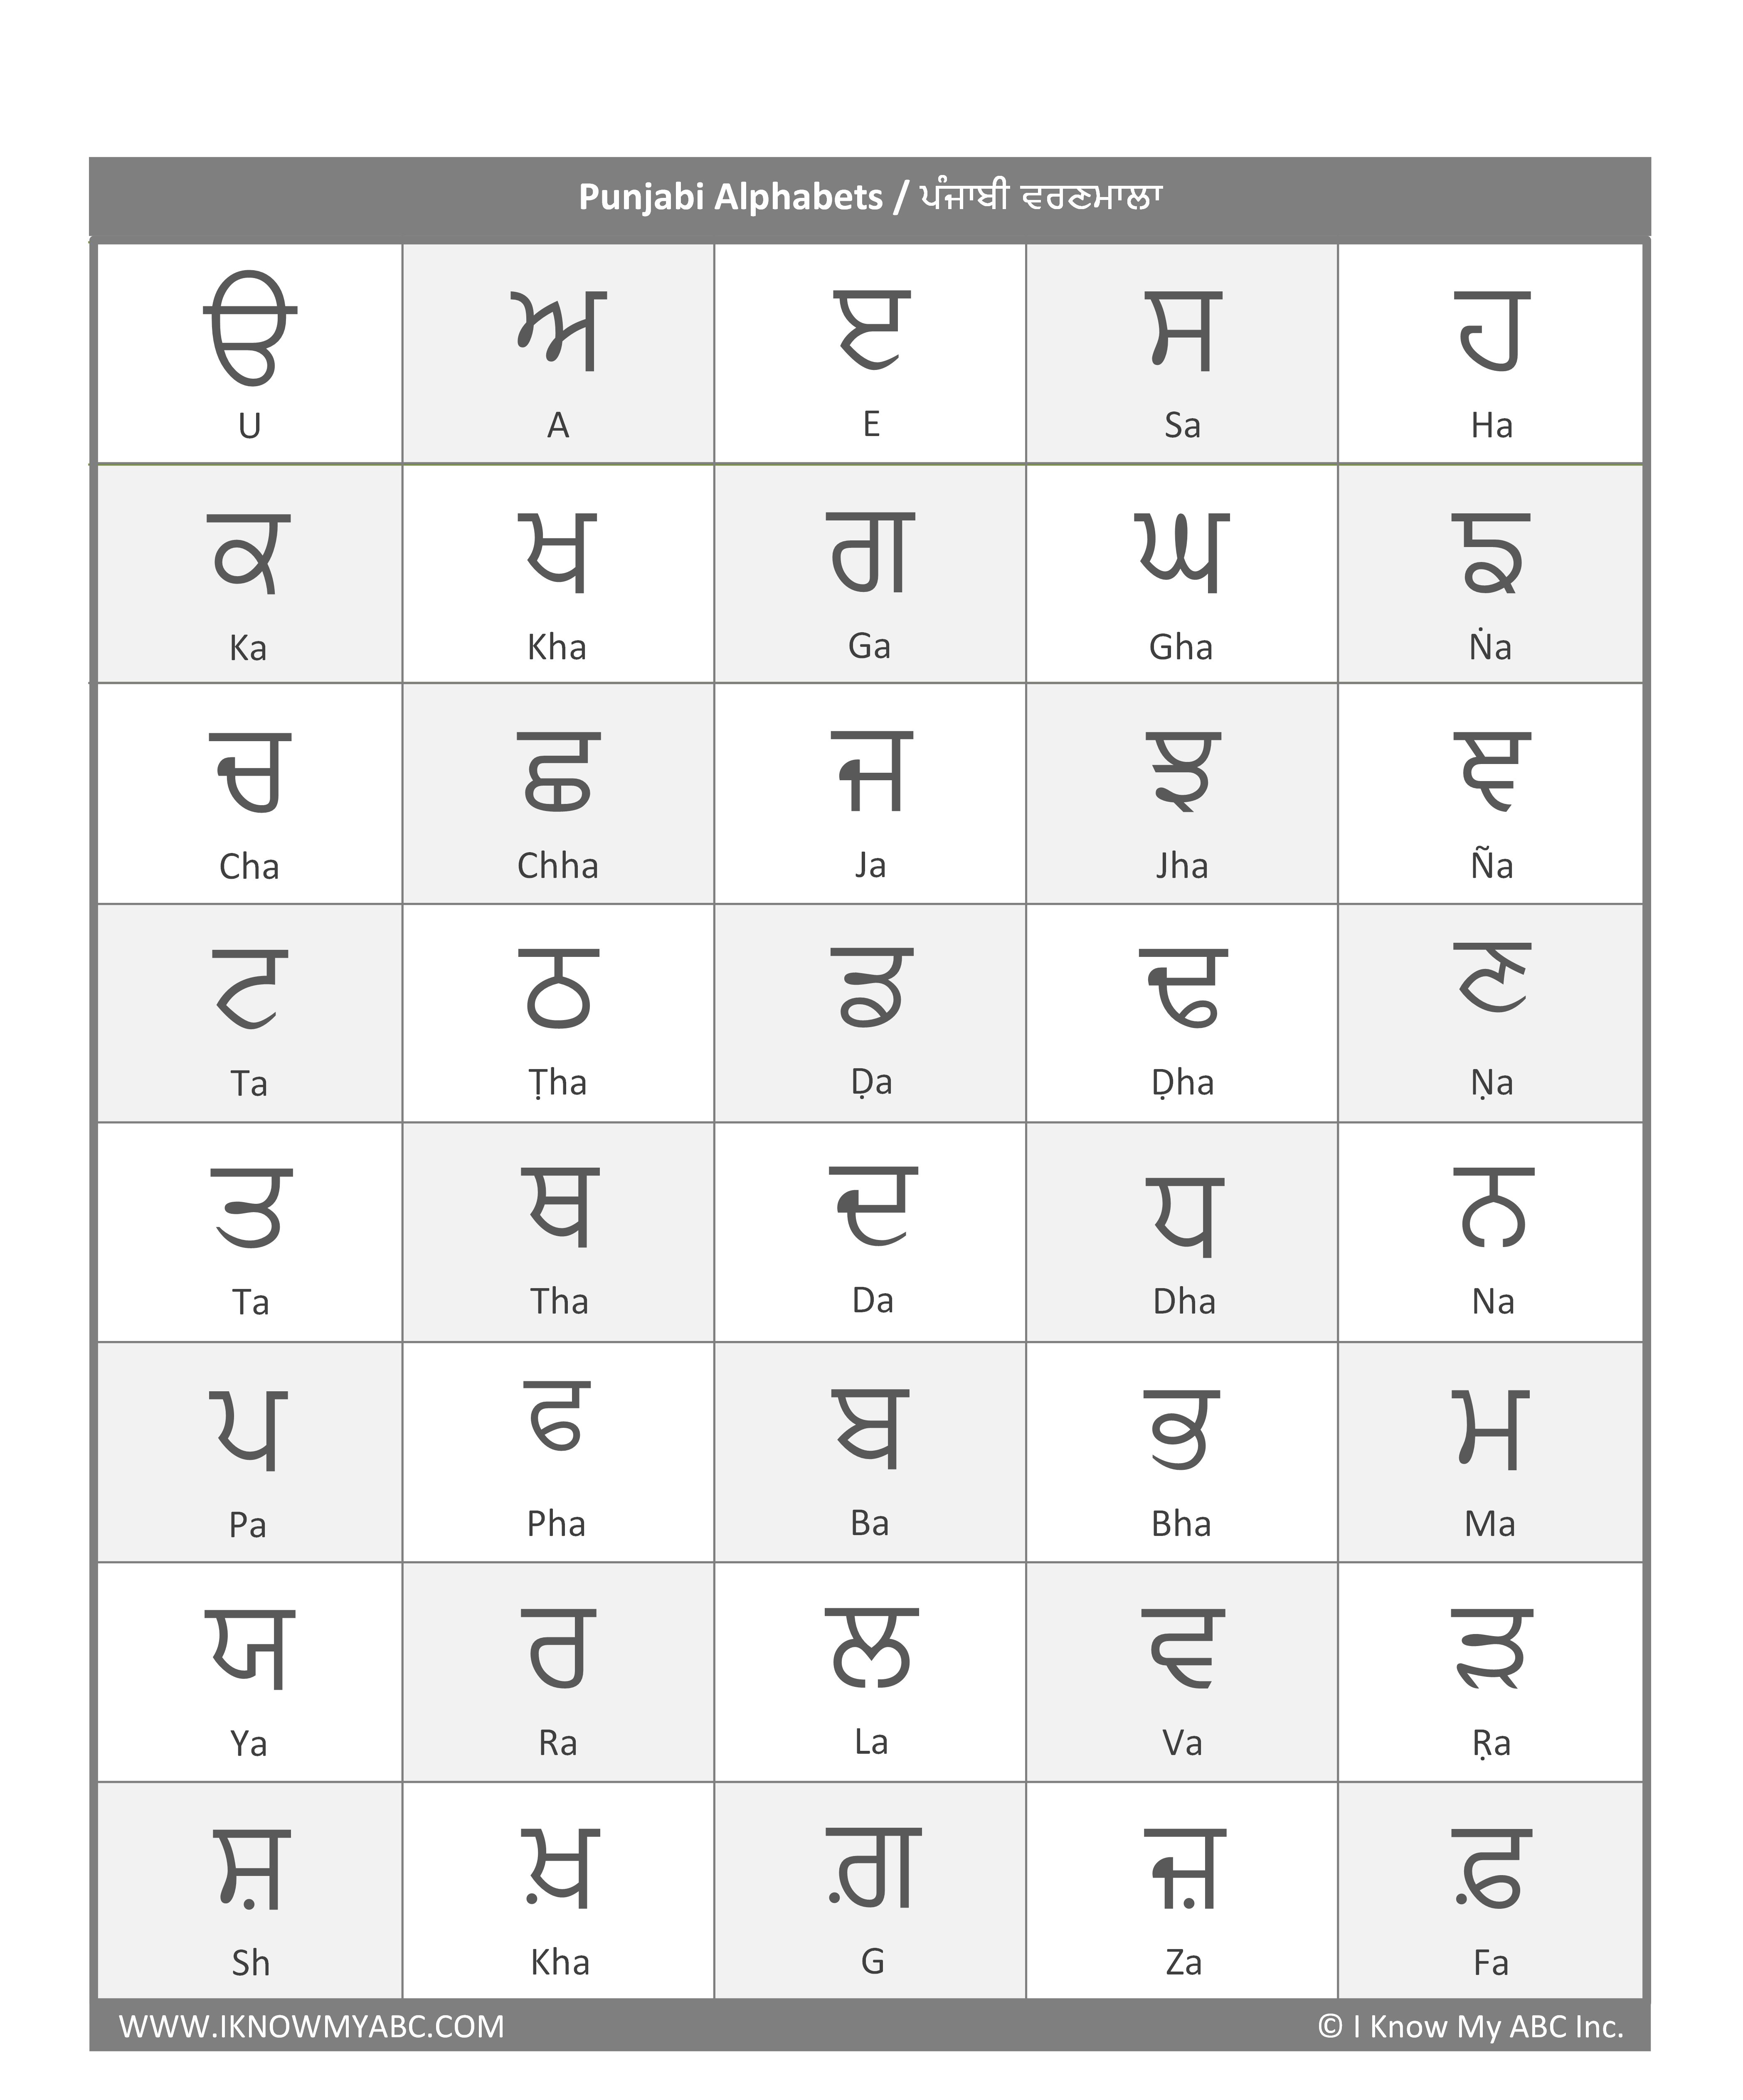 want-to-learn-punjabi-alphabets-photos-alphabet-collections